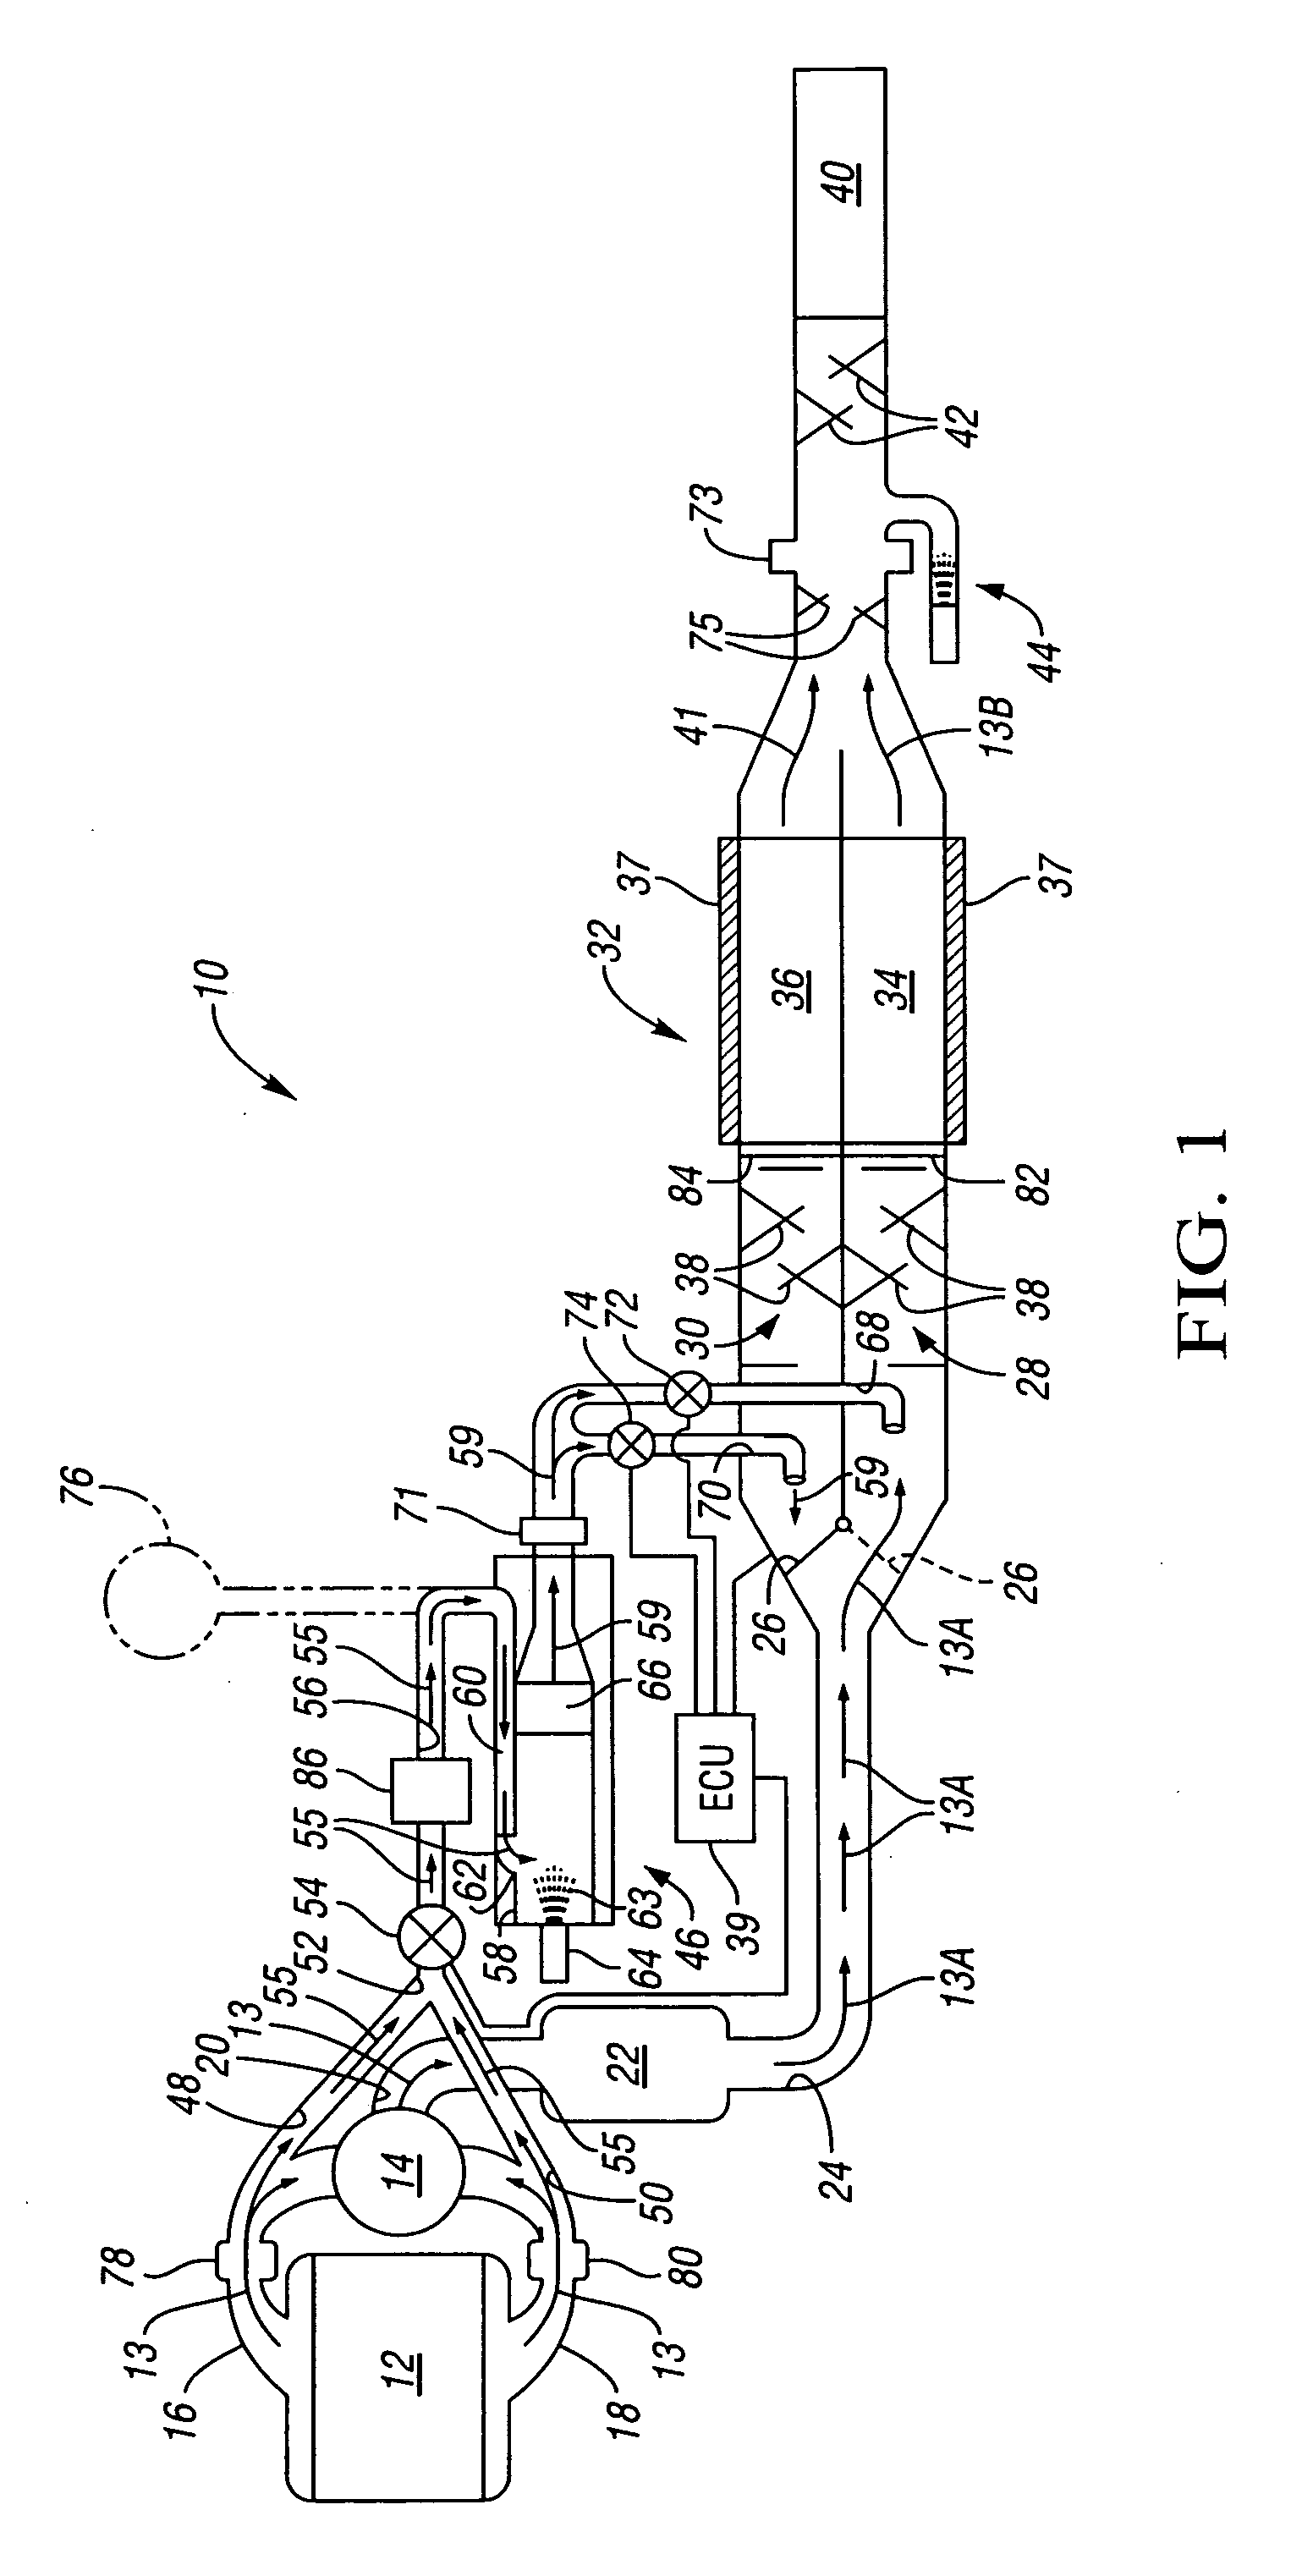 Exhaust aftertreatment system and method of use for lean burn internal combustion engines